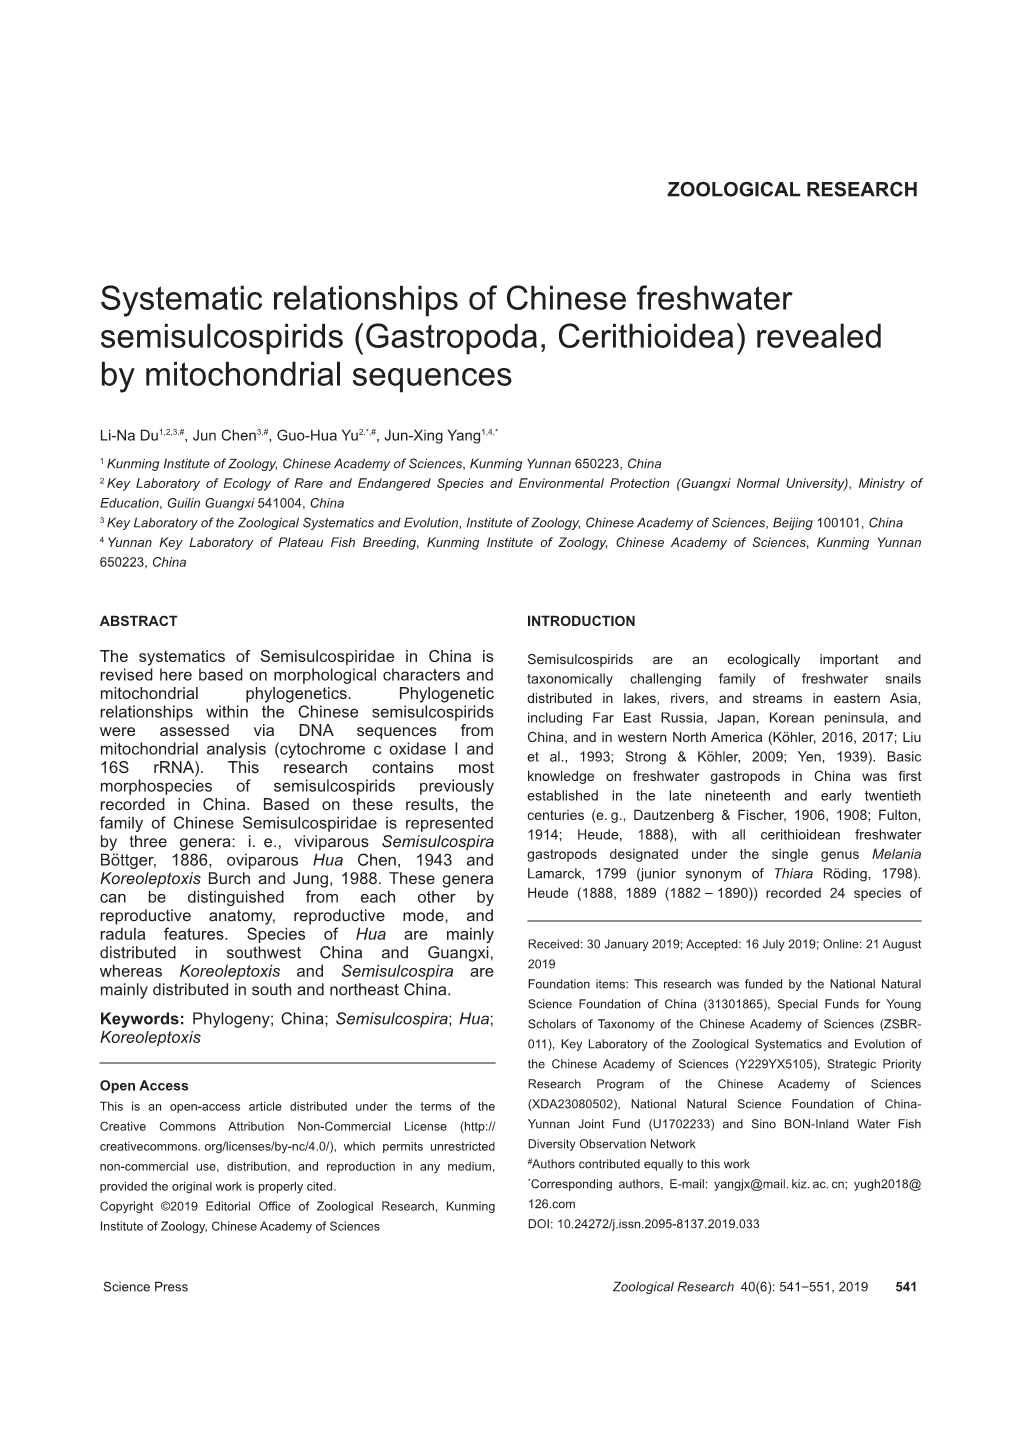 Systematic Relationships of Chinese Freshwater Semisulcospirids (Gastropoda, Cerithioidea) Revealed by Mitochondrial Sequences